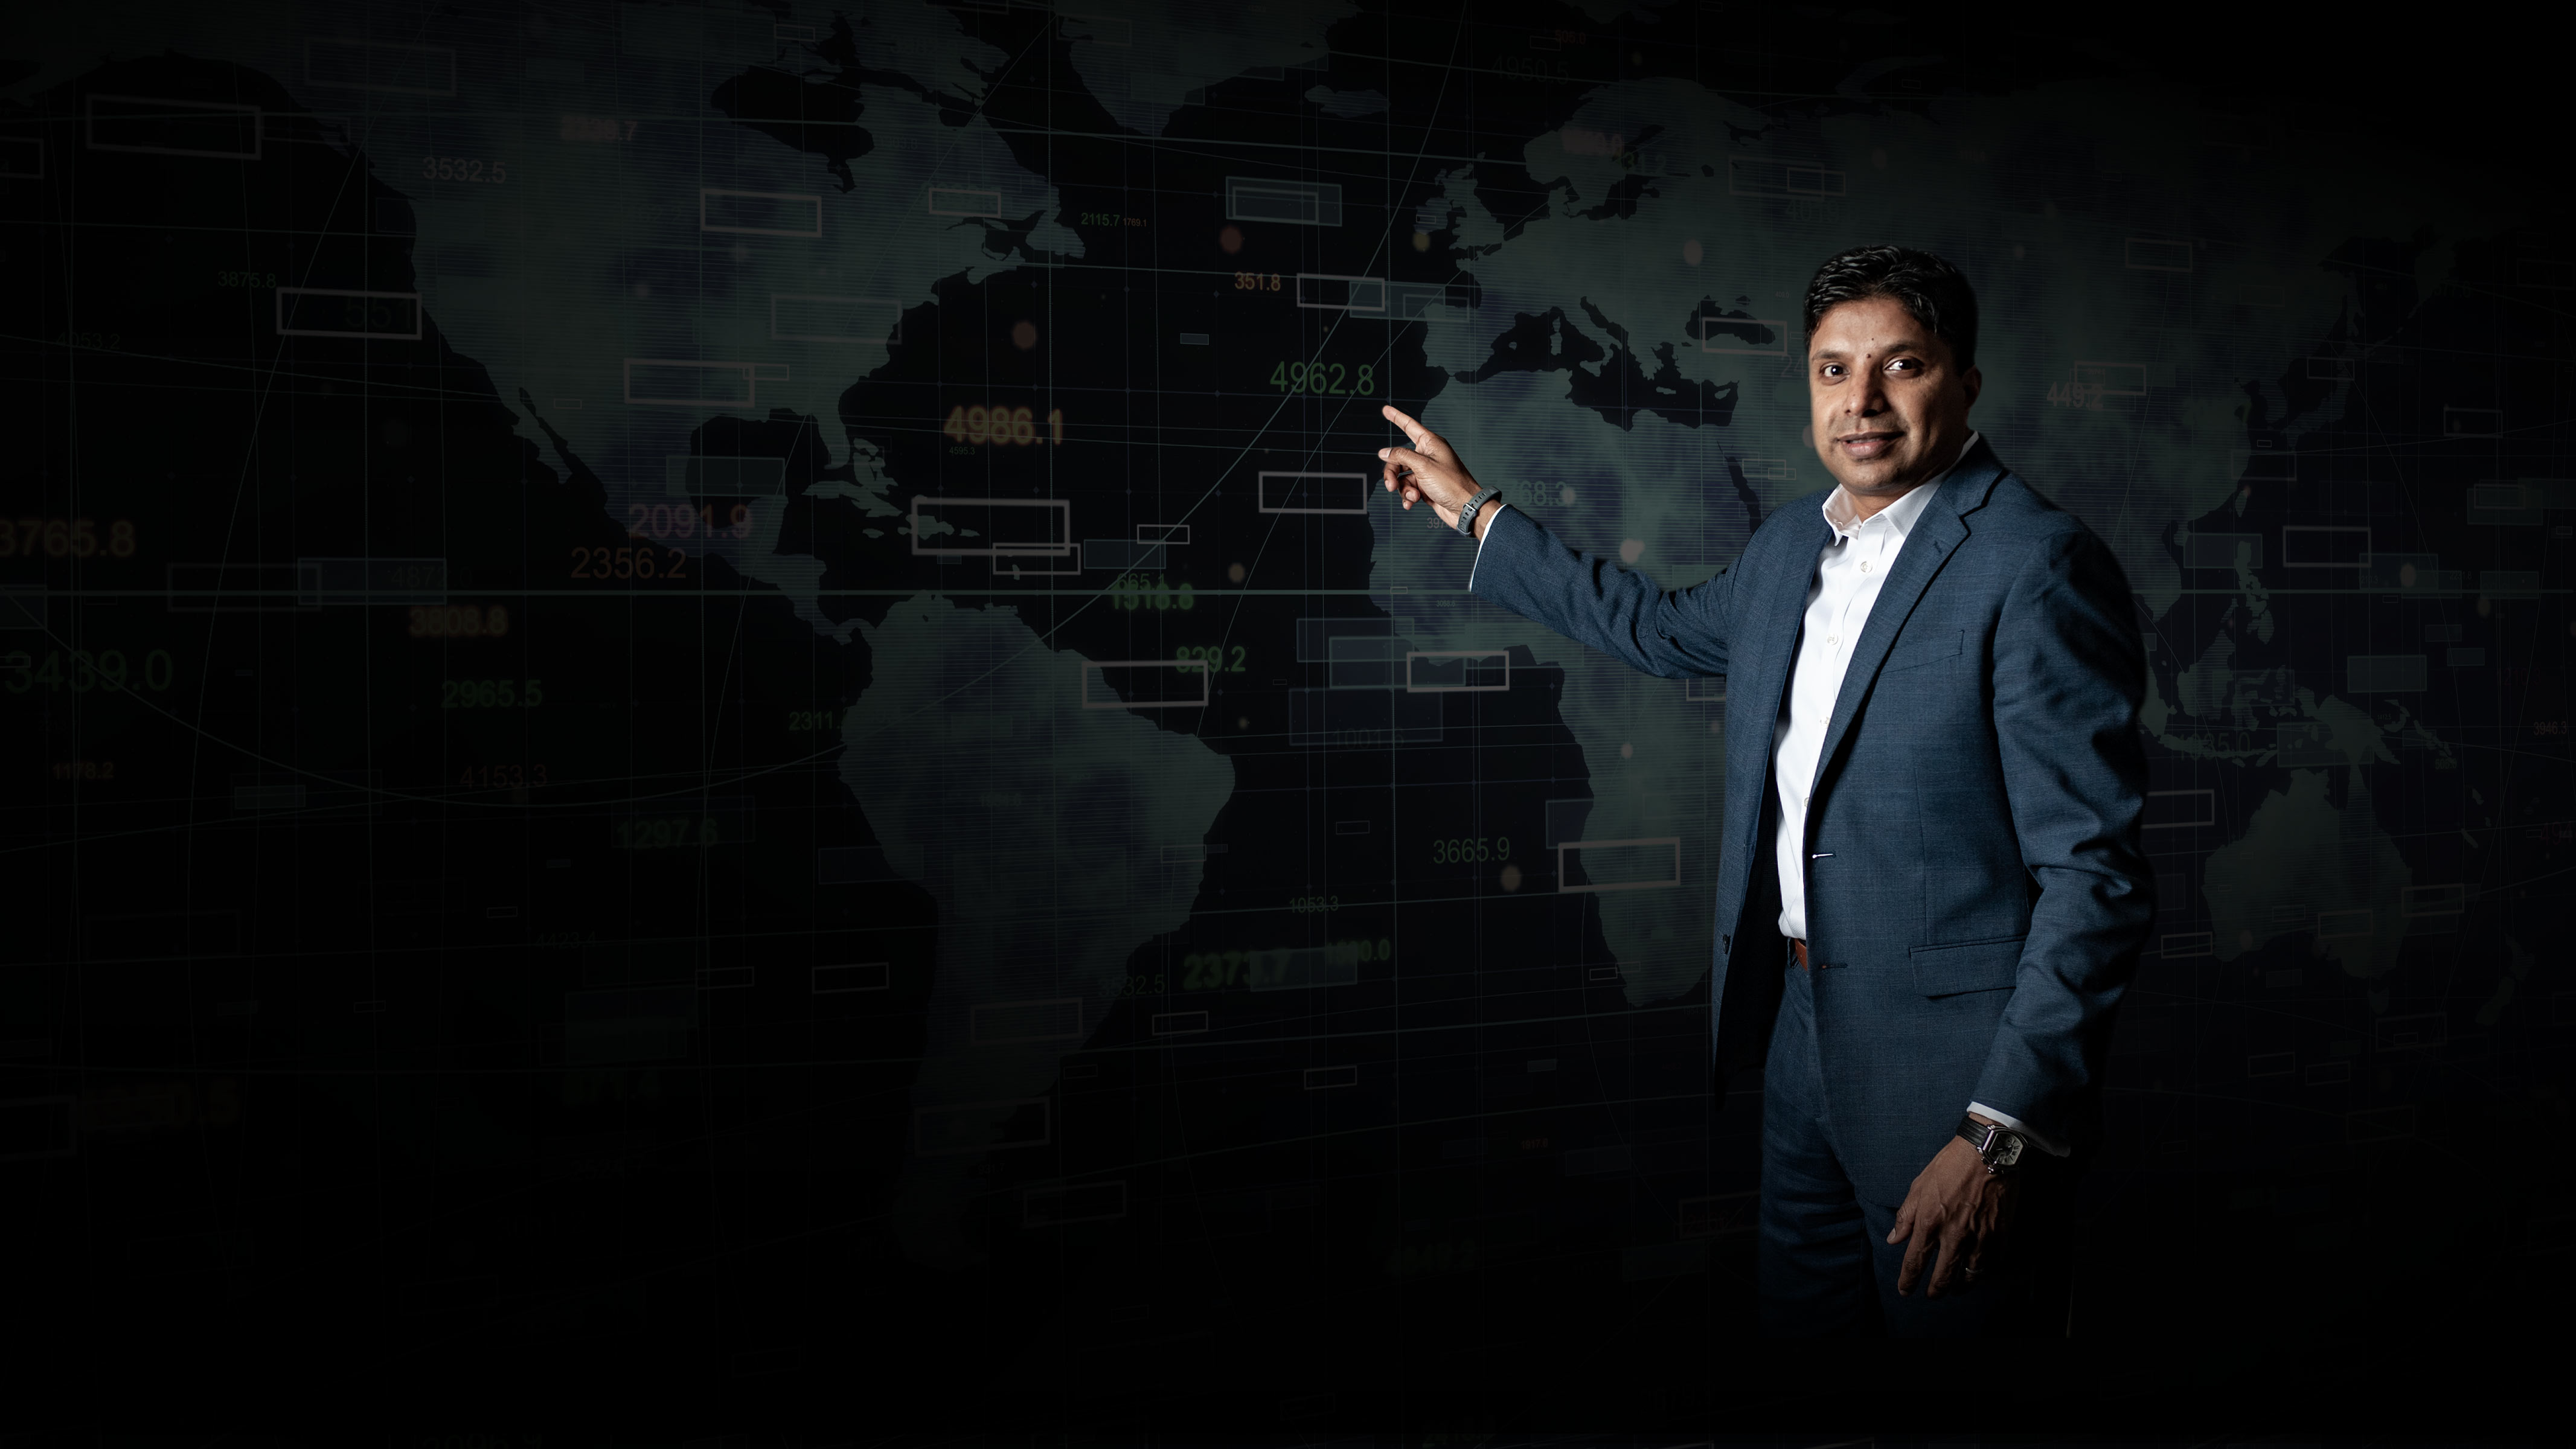 Santhosh Nair, VP, pointing to a map